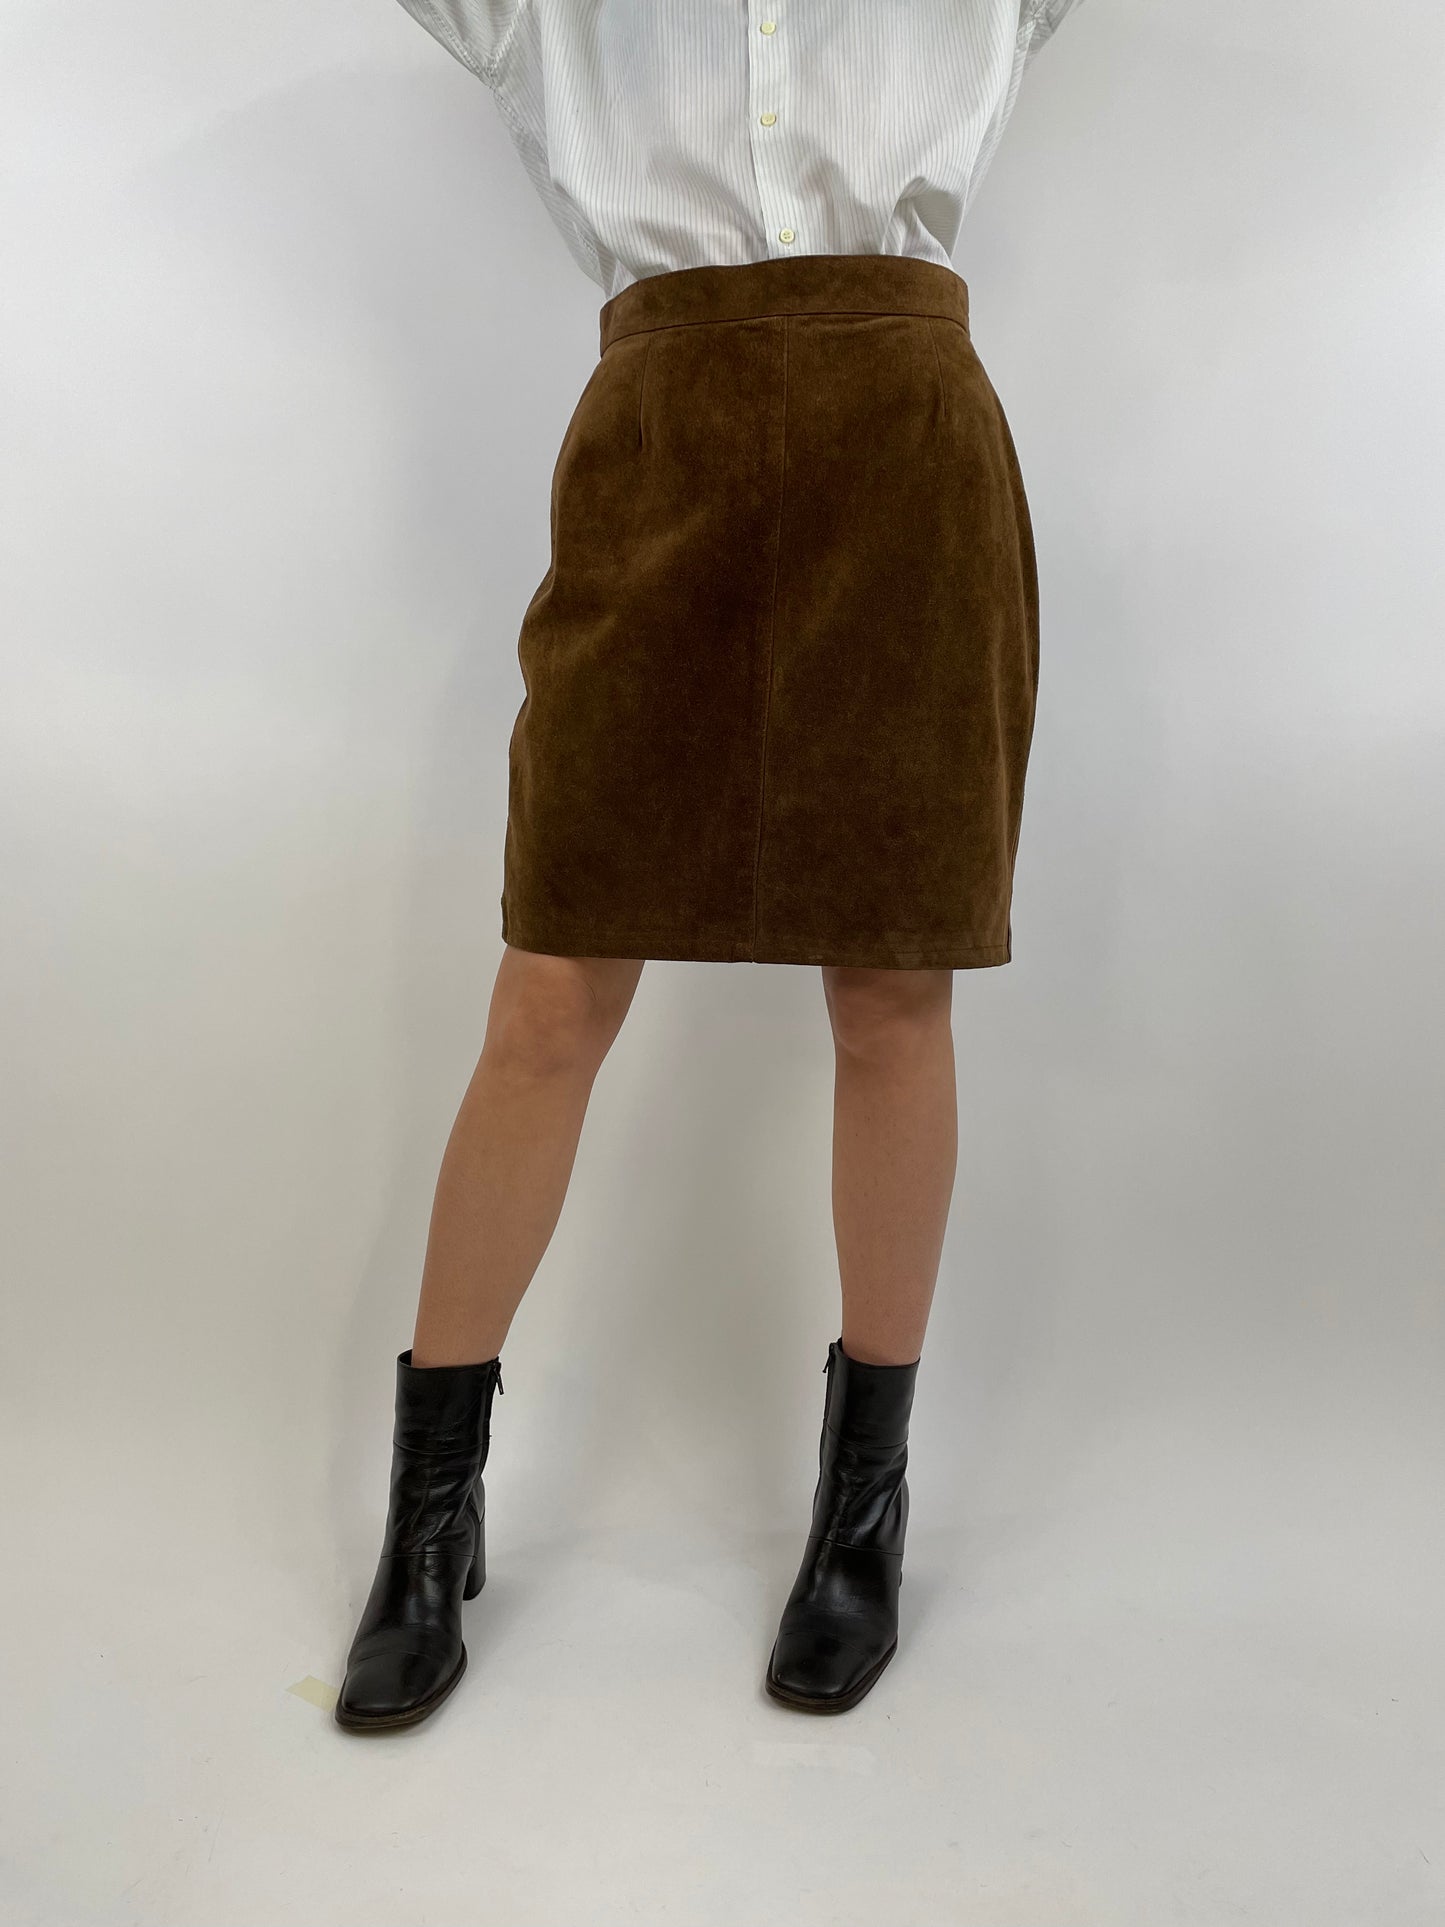 Real leather skirt